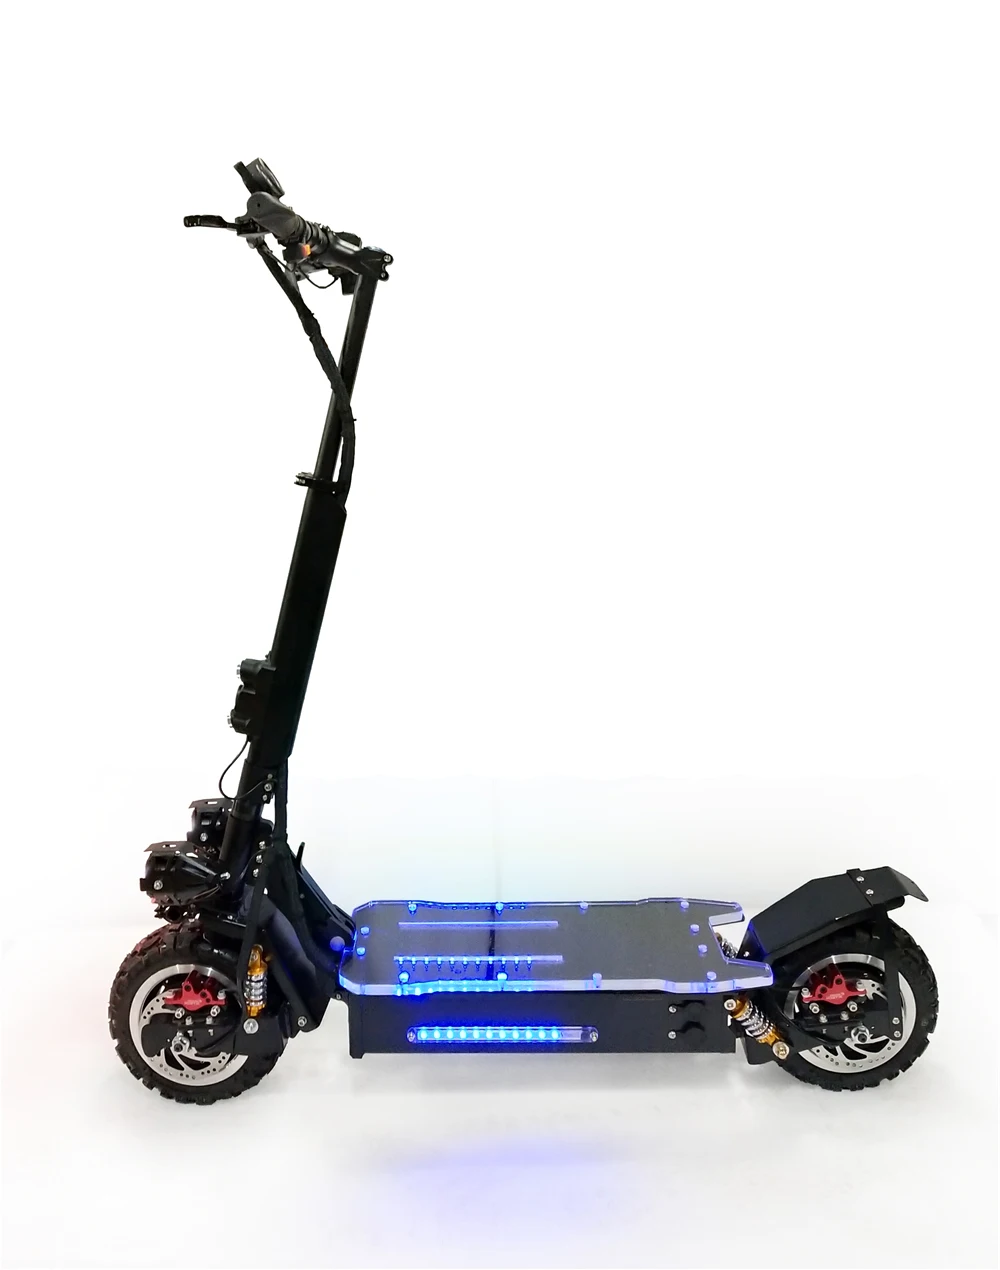 

Dokma campaign electric scooter dual motor high speed electric scooter 3200W / 5600W, Black